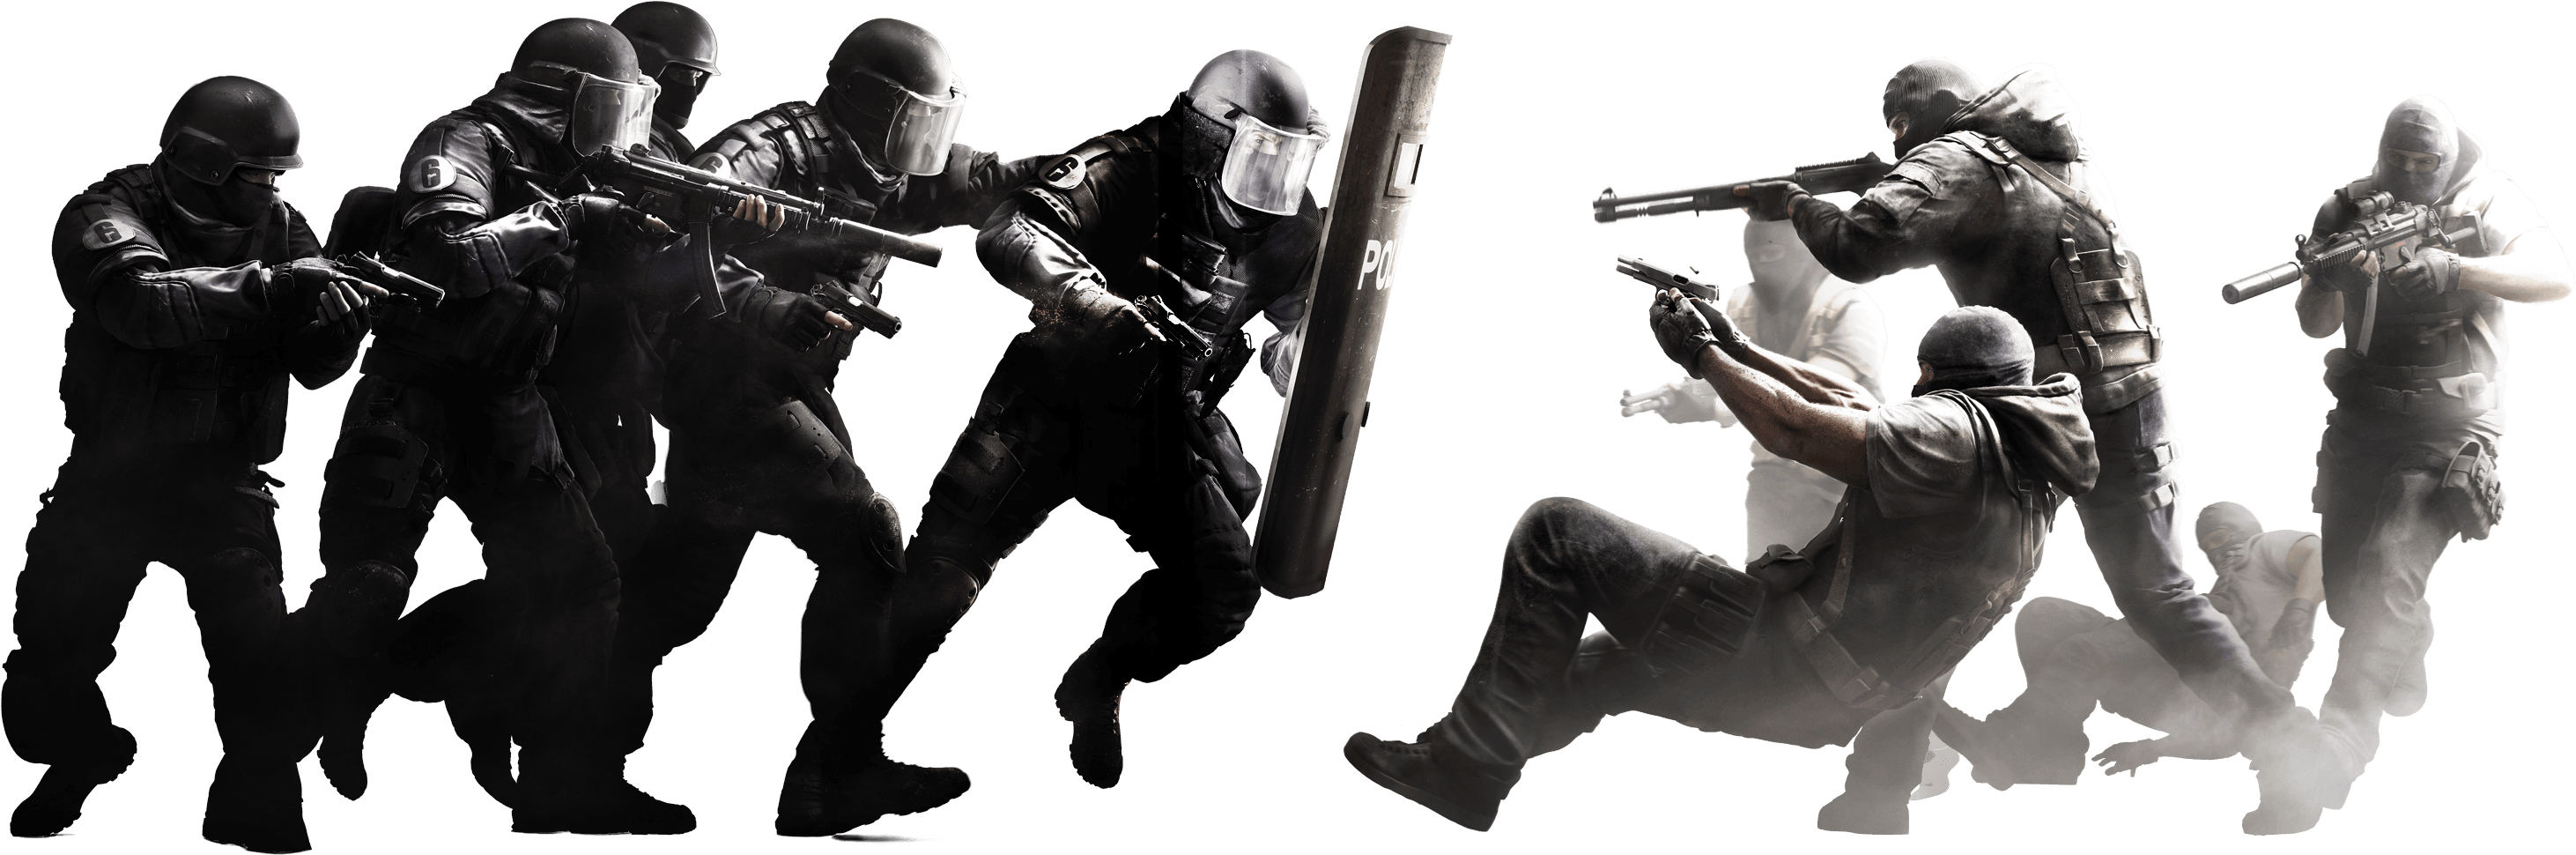 Cola Final - Rainbow Six 6 Vegas 2 (pc) Game (3340x1200), Png Download